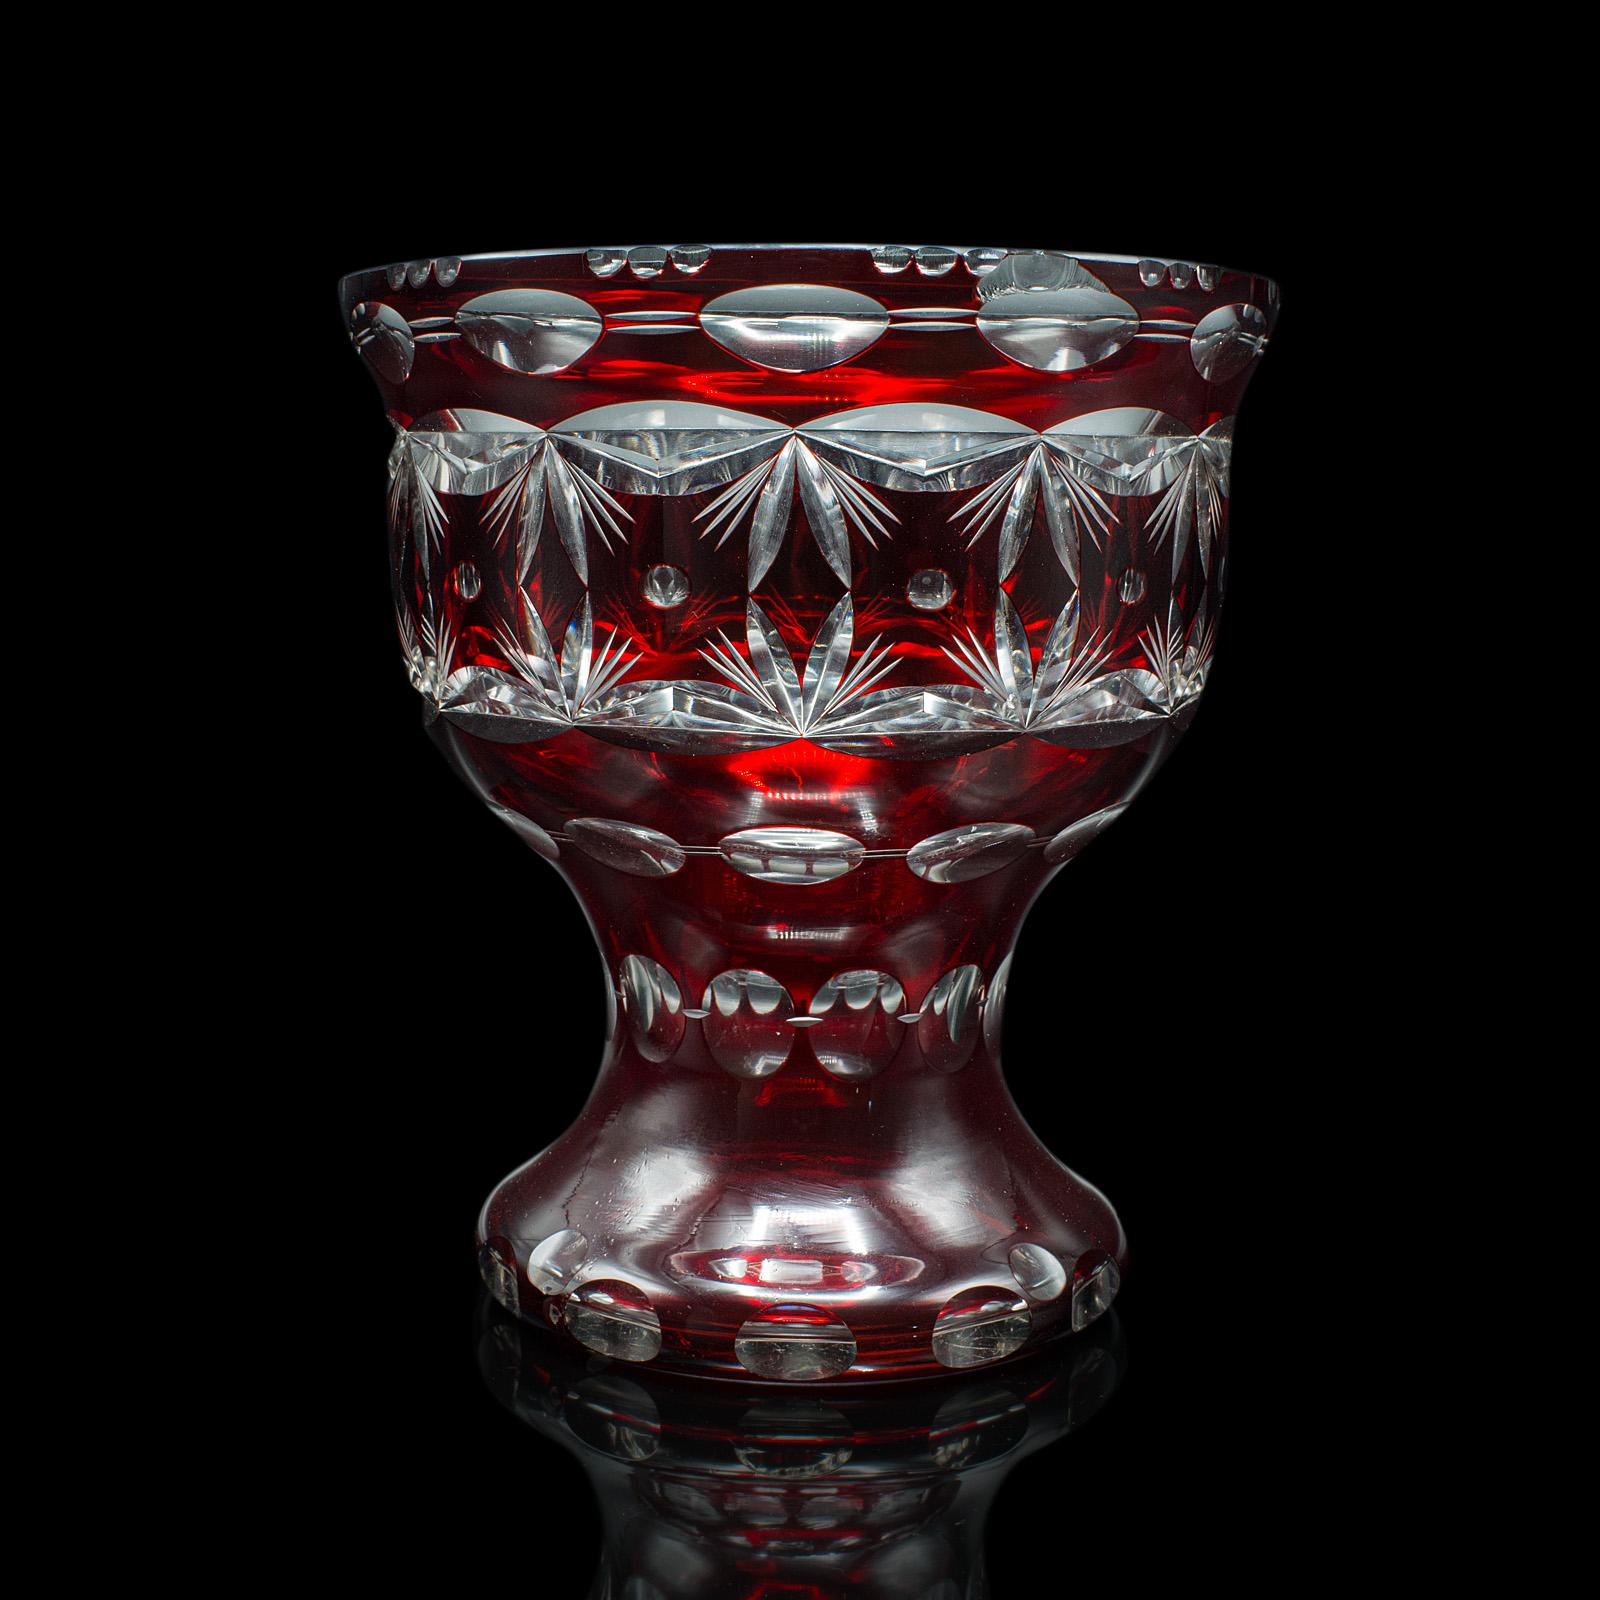 Czech Antique Pedestal Bowl, Continental, Red Glass, Decorative Ice Bucket, Circa 1920 For Sale